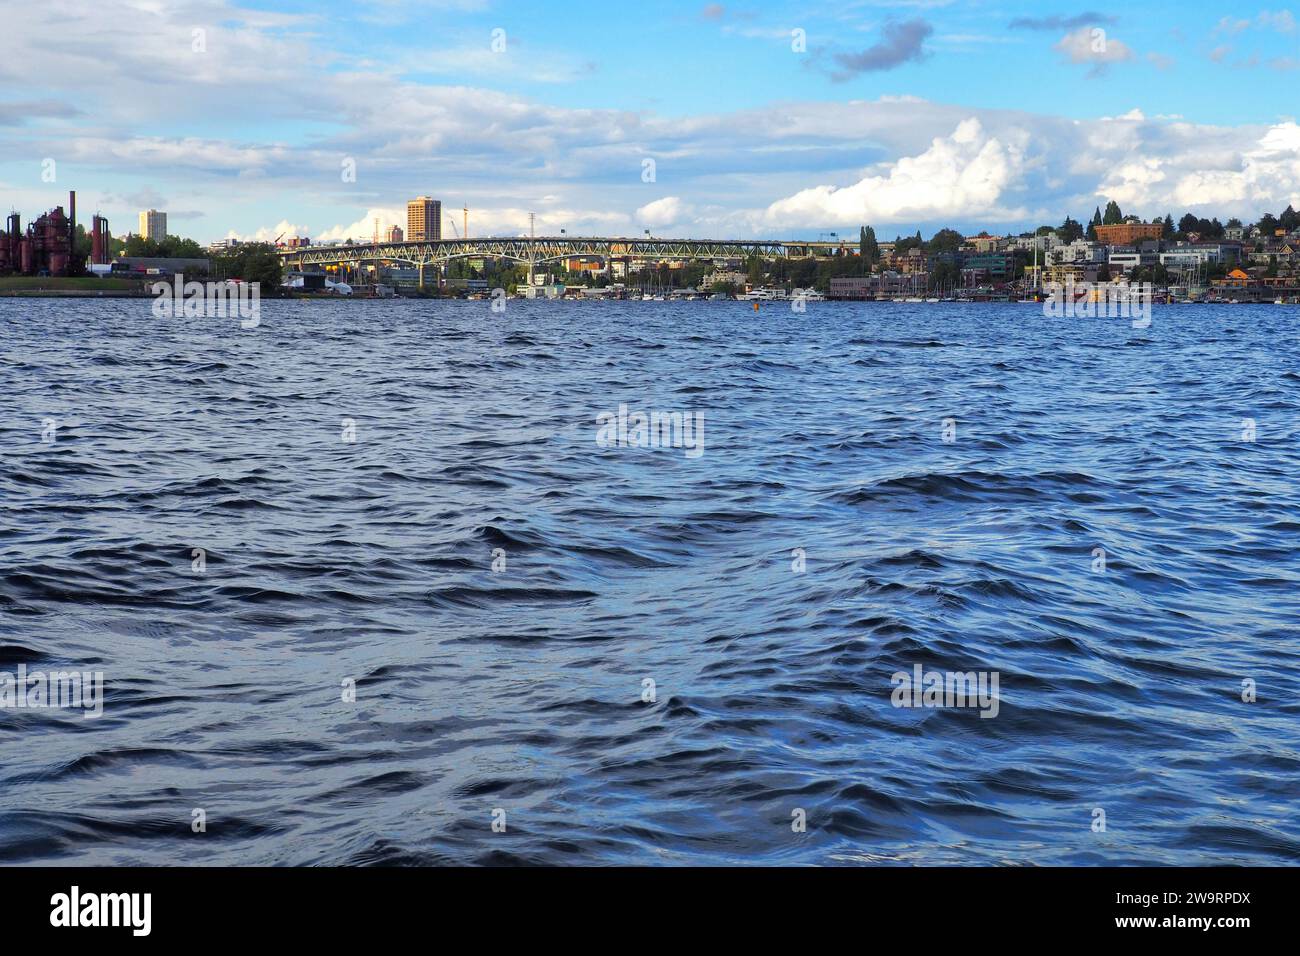 View of Seattle, WA from a boat on Lake Union on a sunny summer day. University District is visible in the distance. Stock Photo